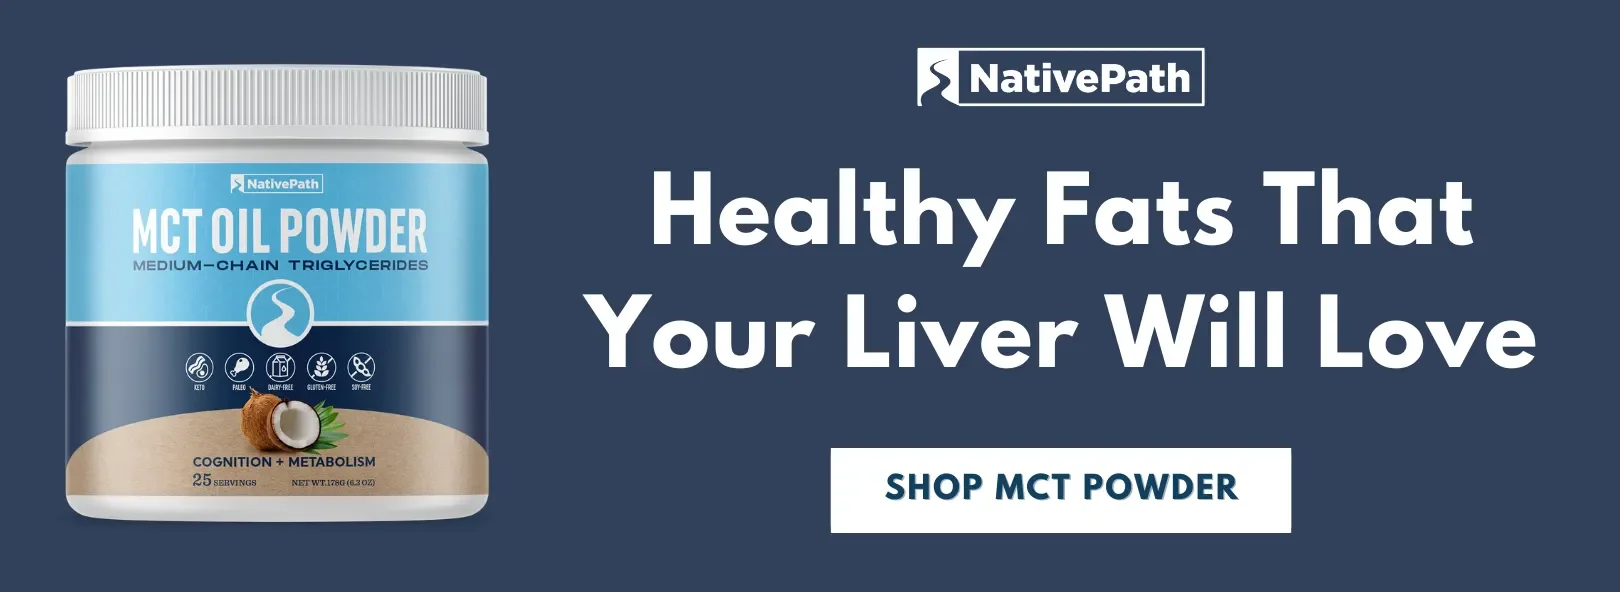 Healthy Fats That Your Liver Will Love: Shop NativePath MCT Powder